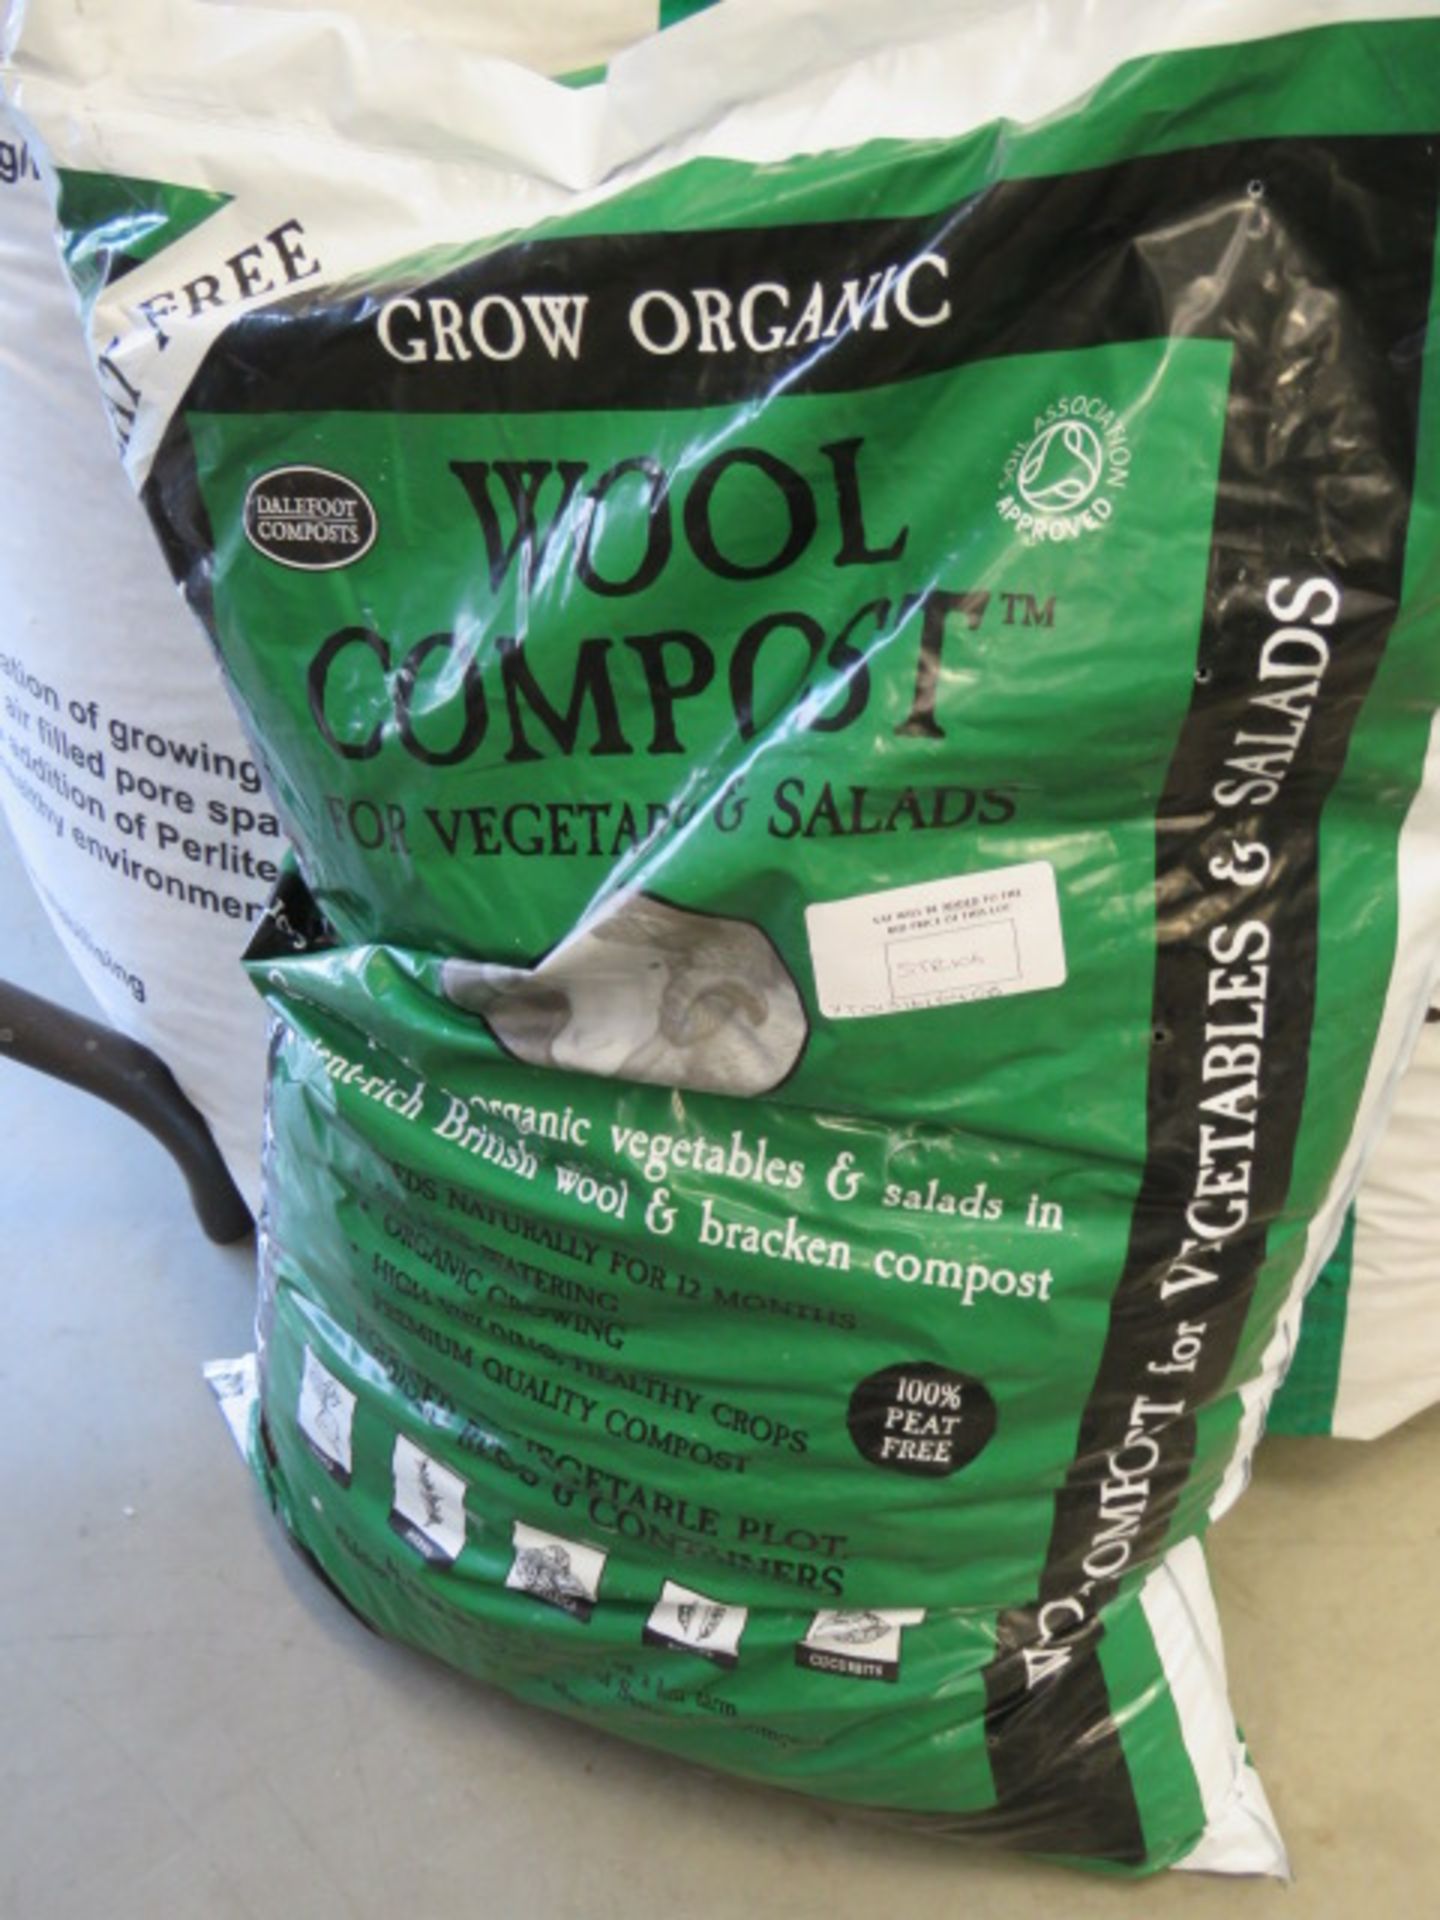 2 bags of Perlite horticultural sand - Image 3 of 3